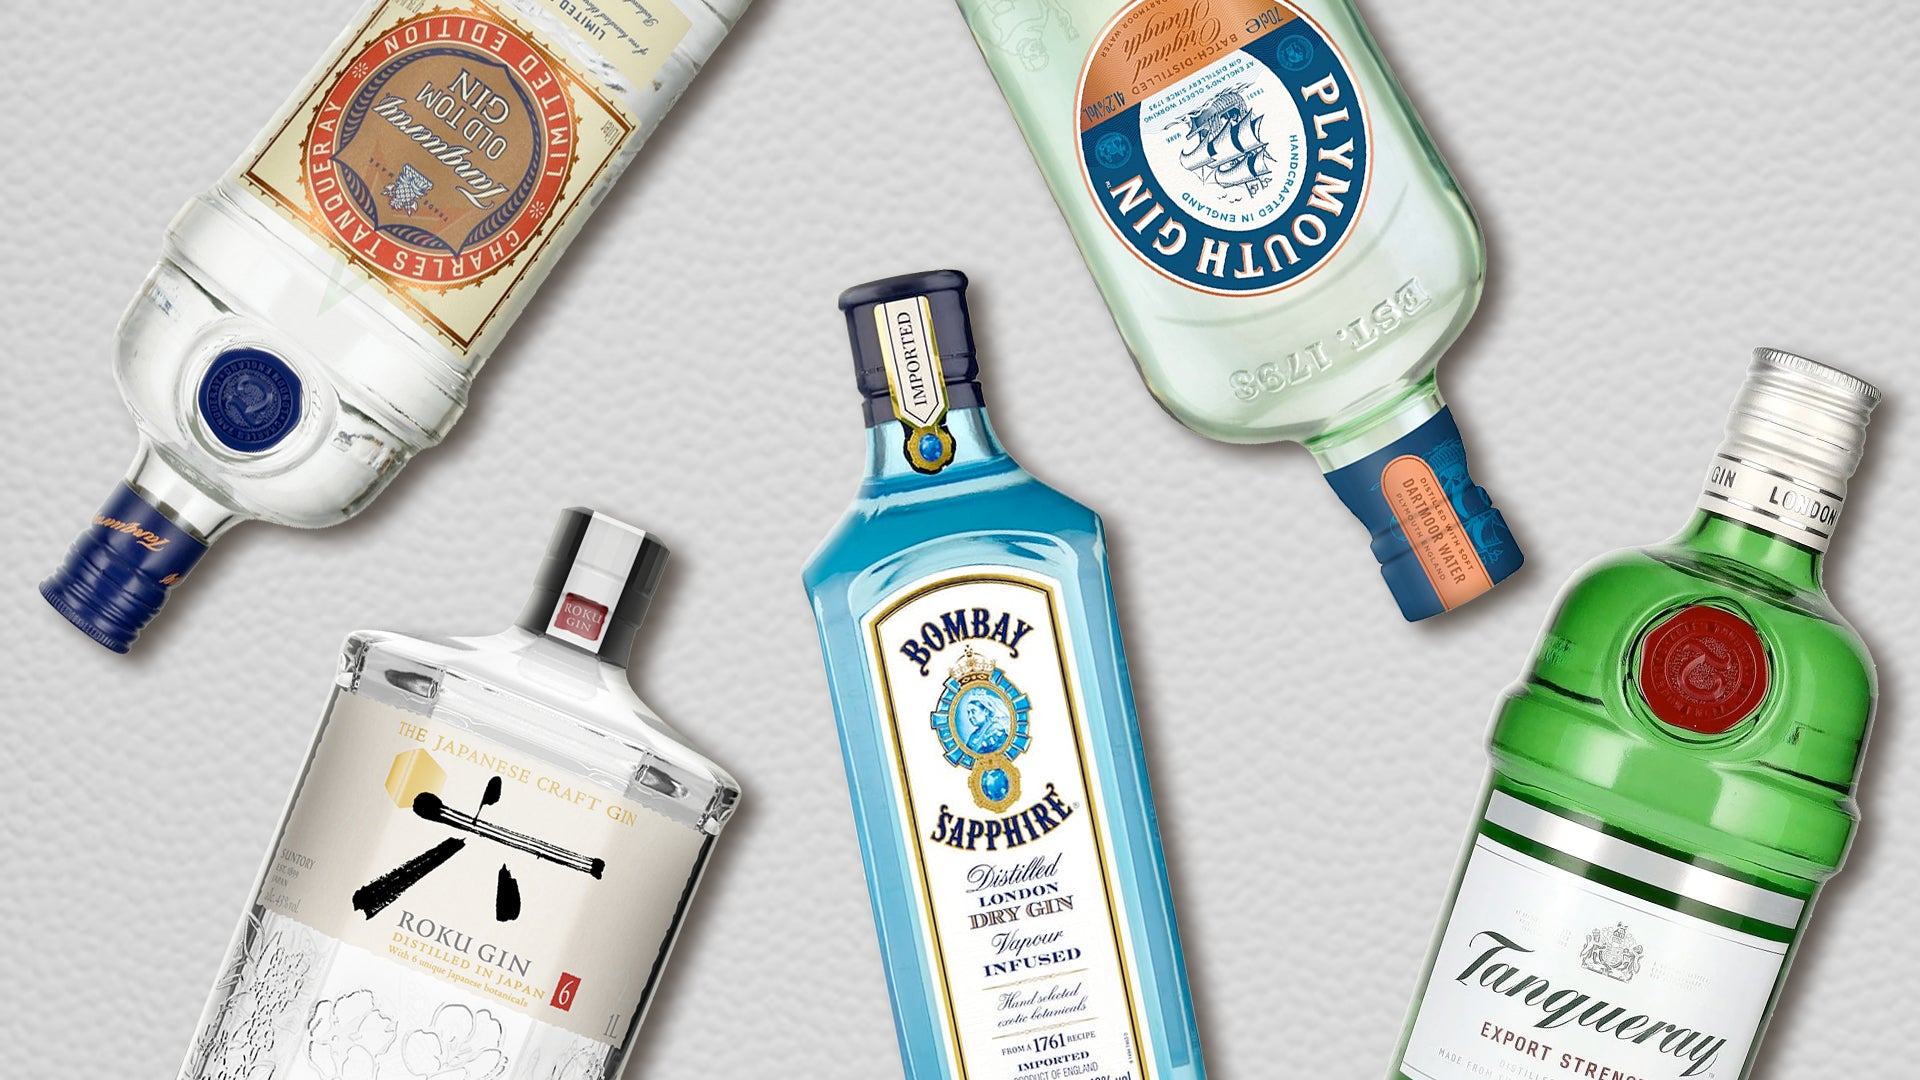 Types Guide Most the Varieties to A Gin: of Popular